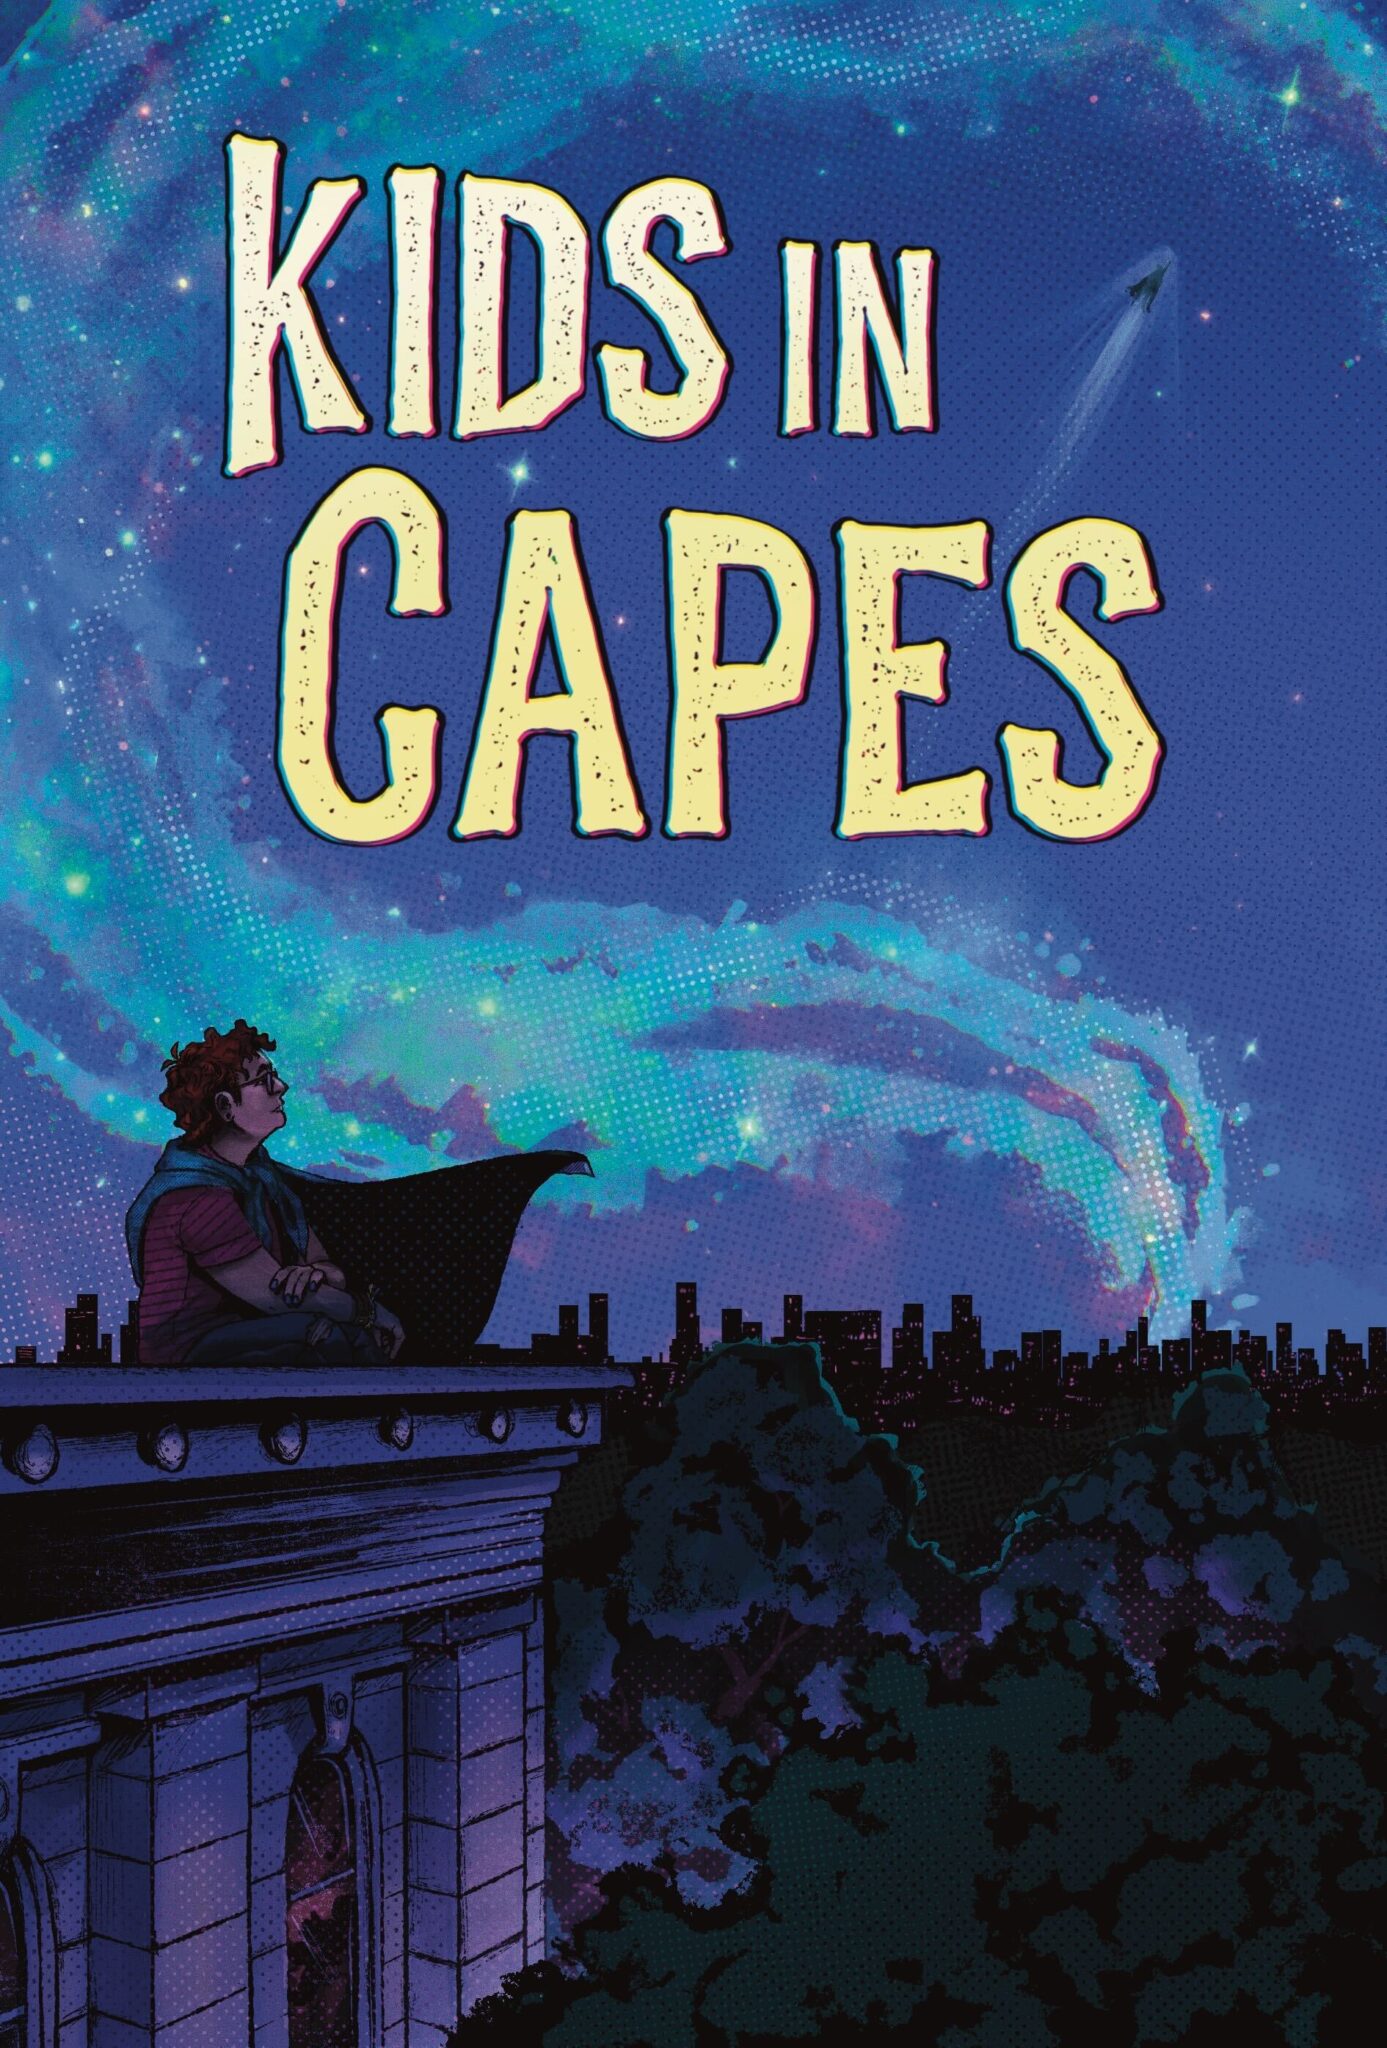 Kids In Capes cover by Nala Wu